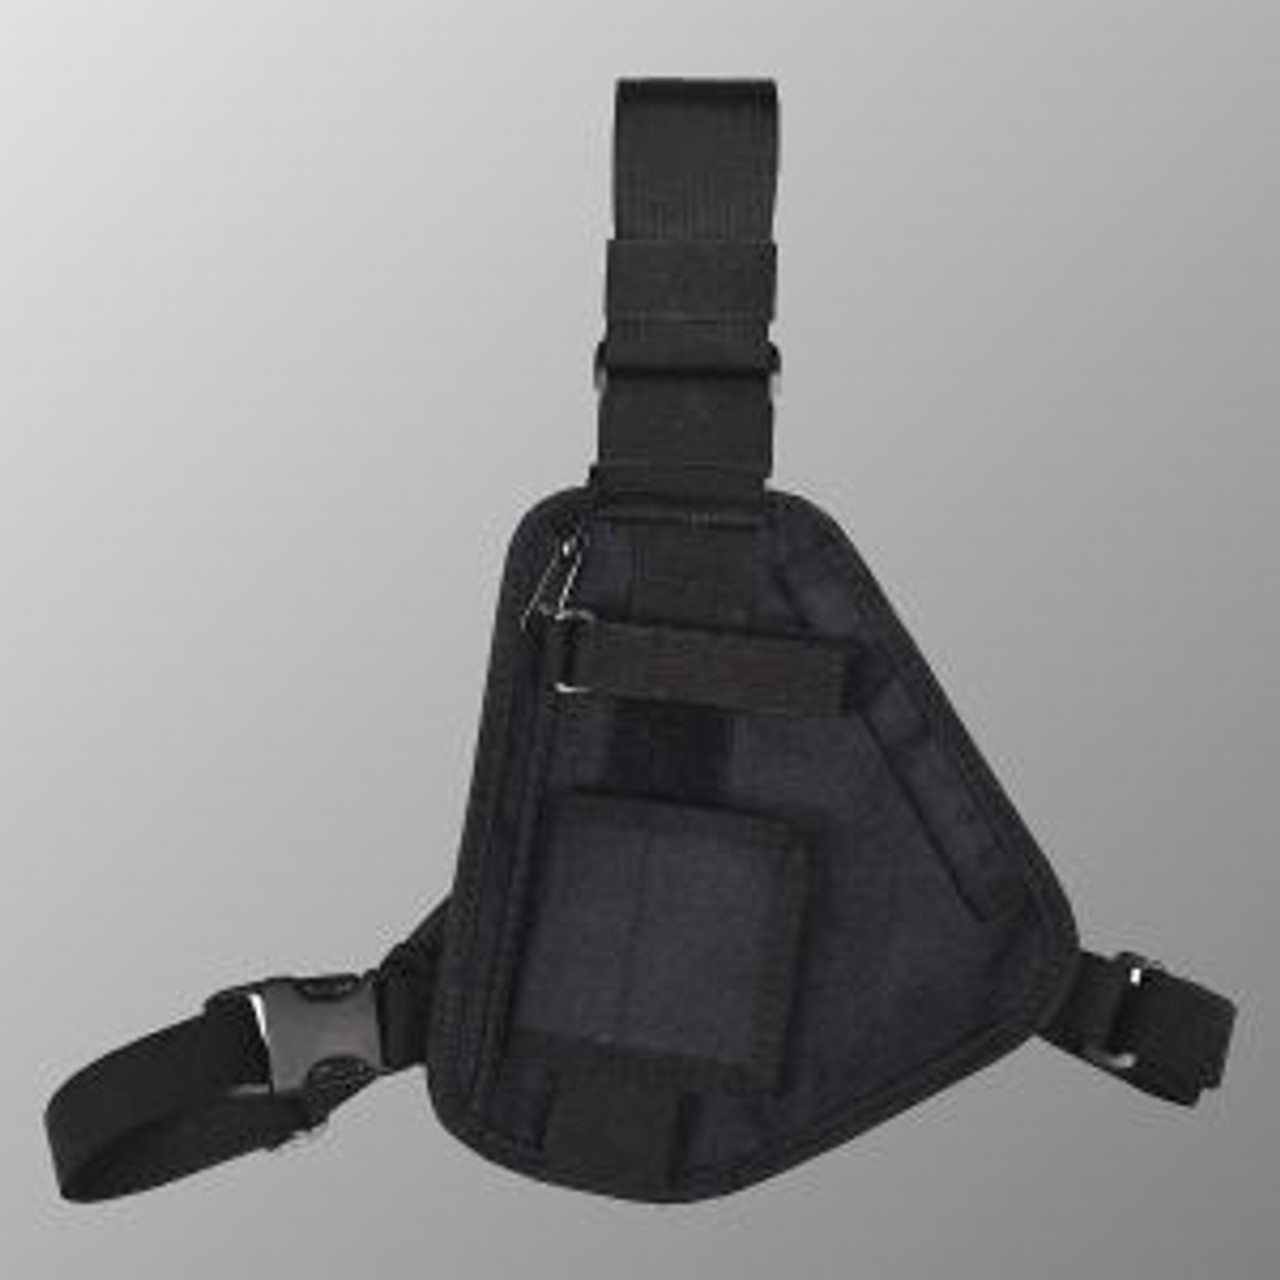 HYT / Hytera PD792EX 3-Point Chest Harness - Black